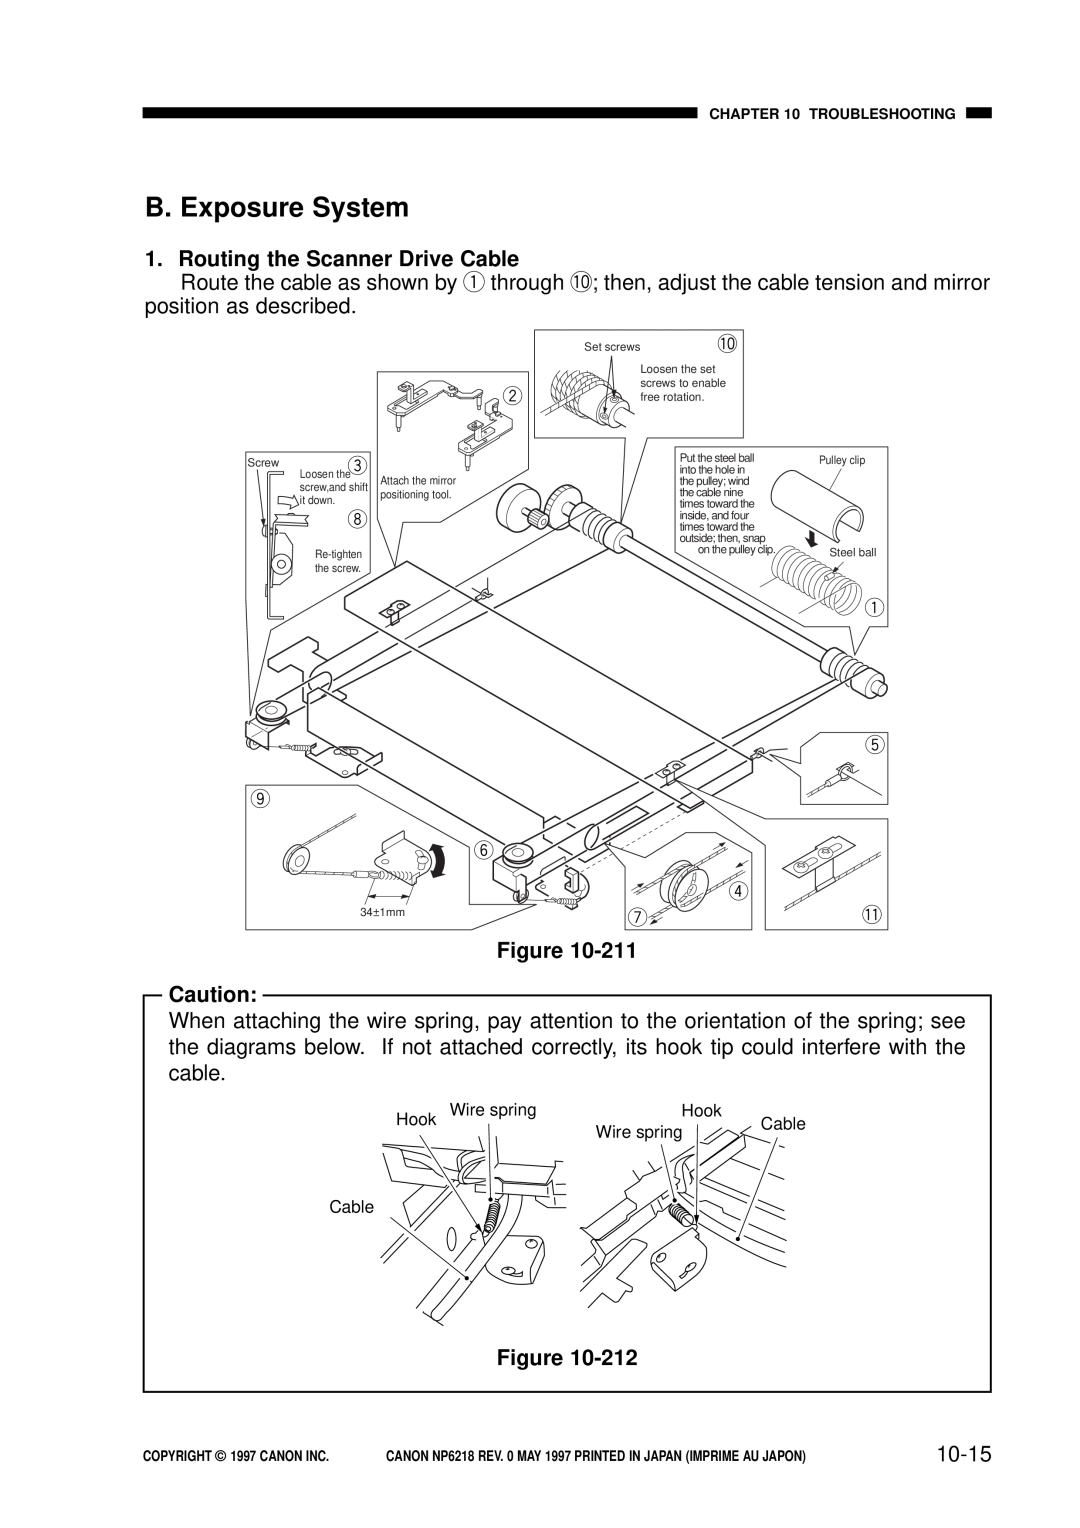 Canon FY8-13EX-000, NP6218 service manual B. Exposure System, Routing the Scanner Drive Cable, 10-15 